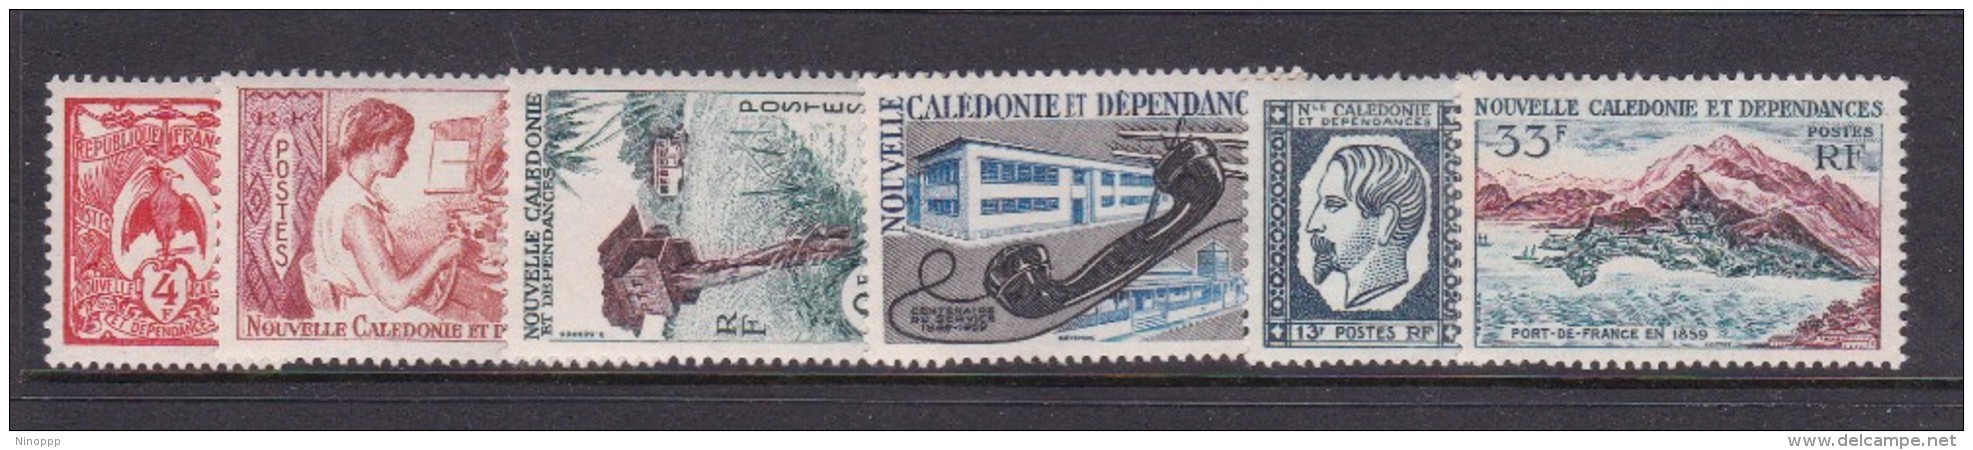 New Caledonia SG 358-64 1960 Postal Centenary Set MNH - Used Stamps